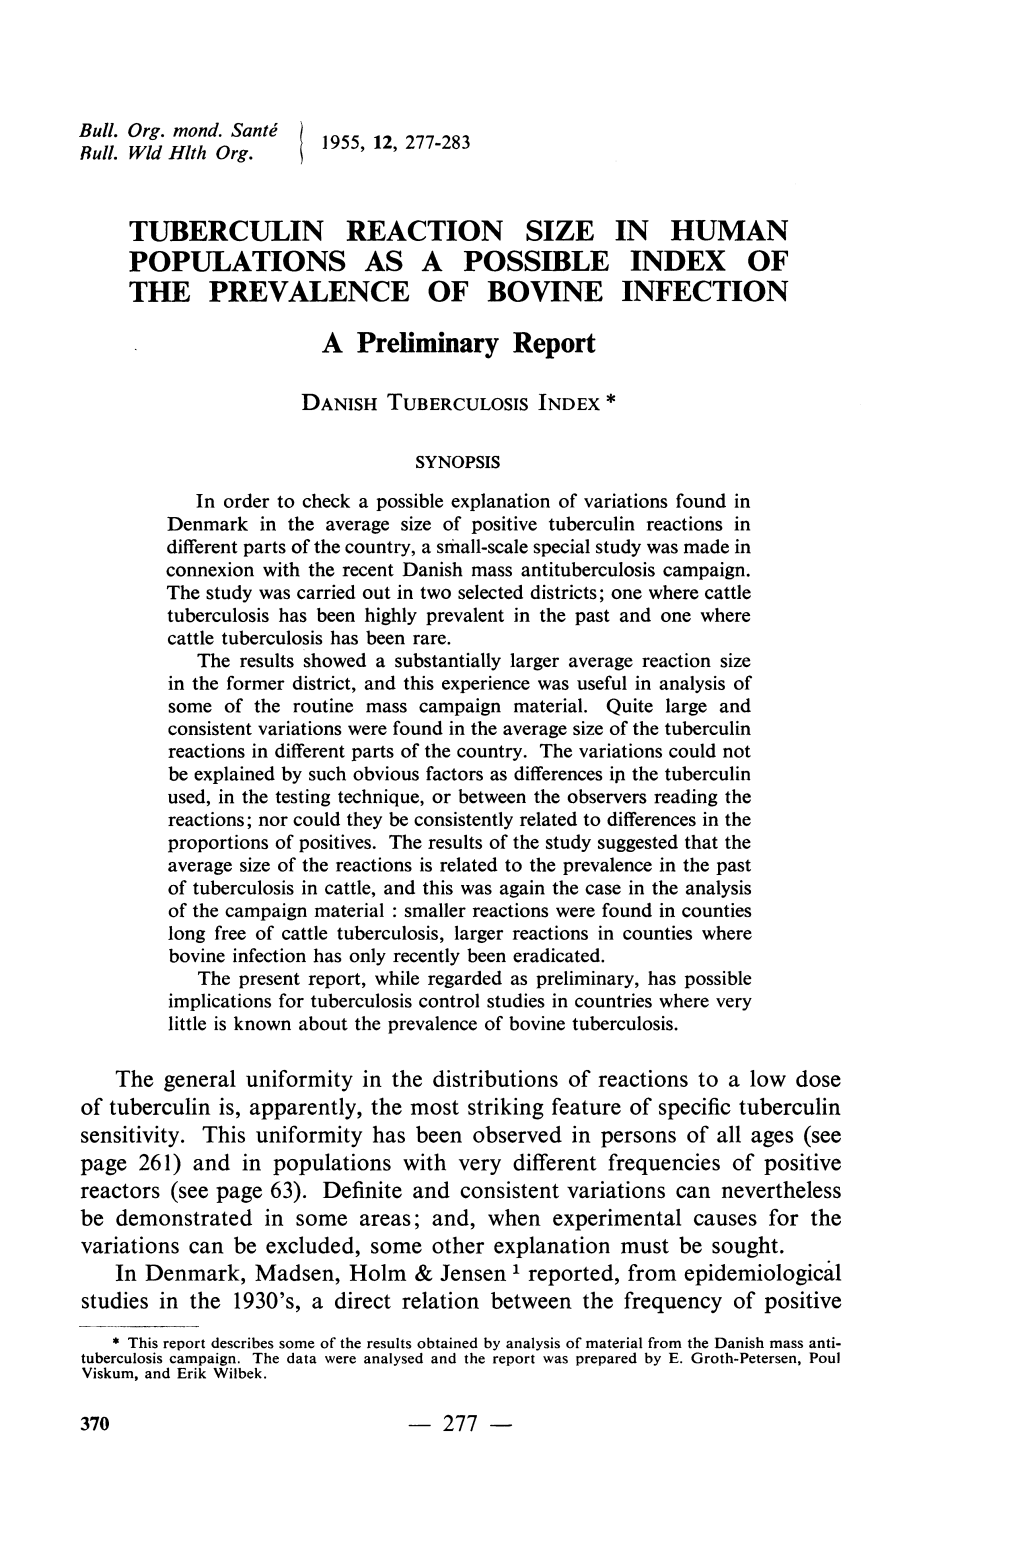 THE PREVALENCE of BOVINE INFECTION a Preliminary Report